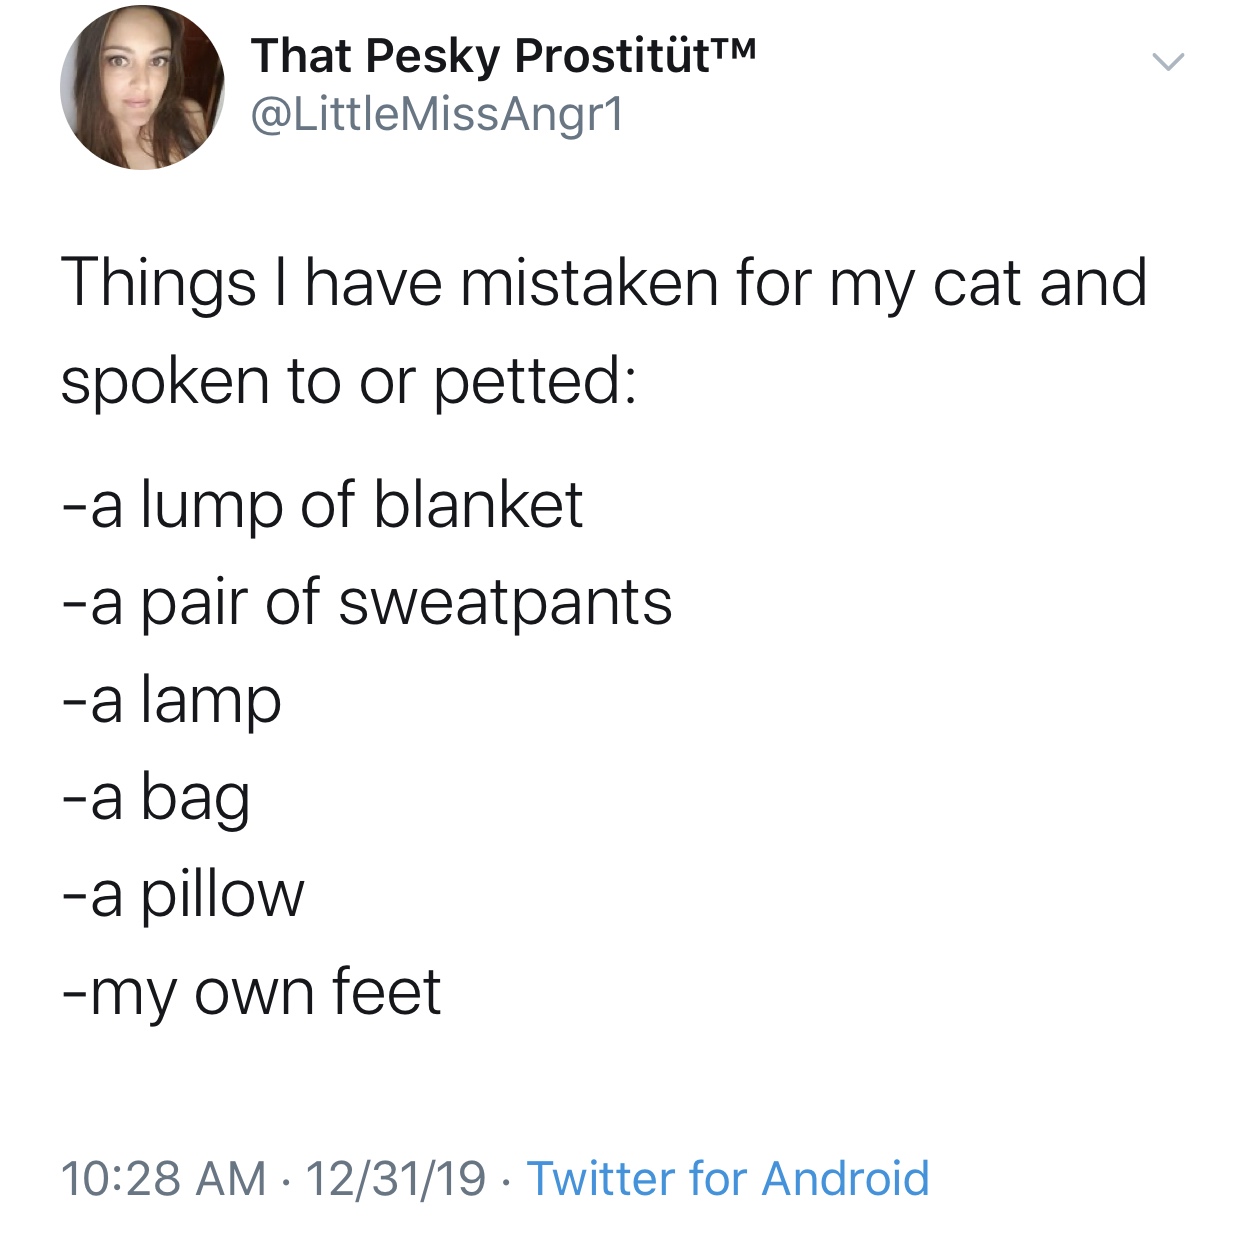 angle - That Pesky ProstittTM MissAngr1 Things I have mistaken for my cat and spoken to or petted a lump of blanket a pair of sweatpants a lamp a bag a pillow my own feet 123119 Twitter for Android